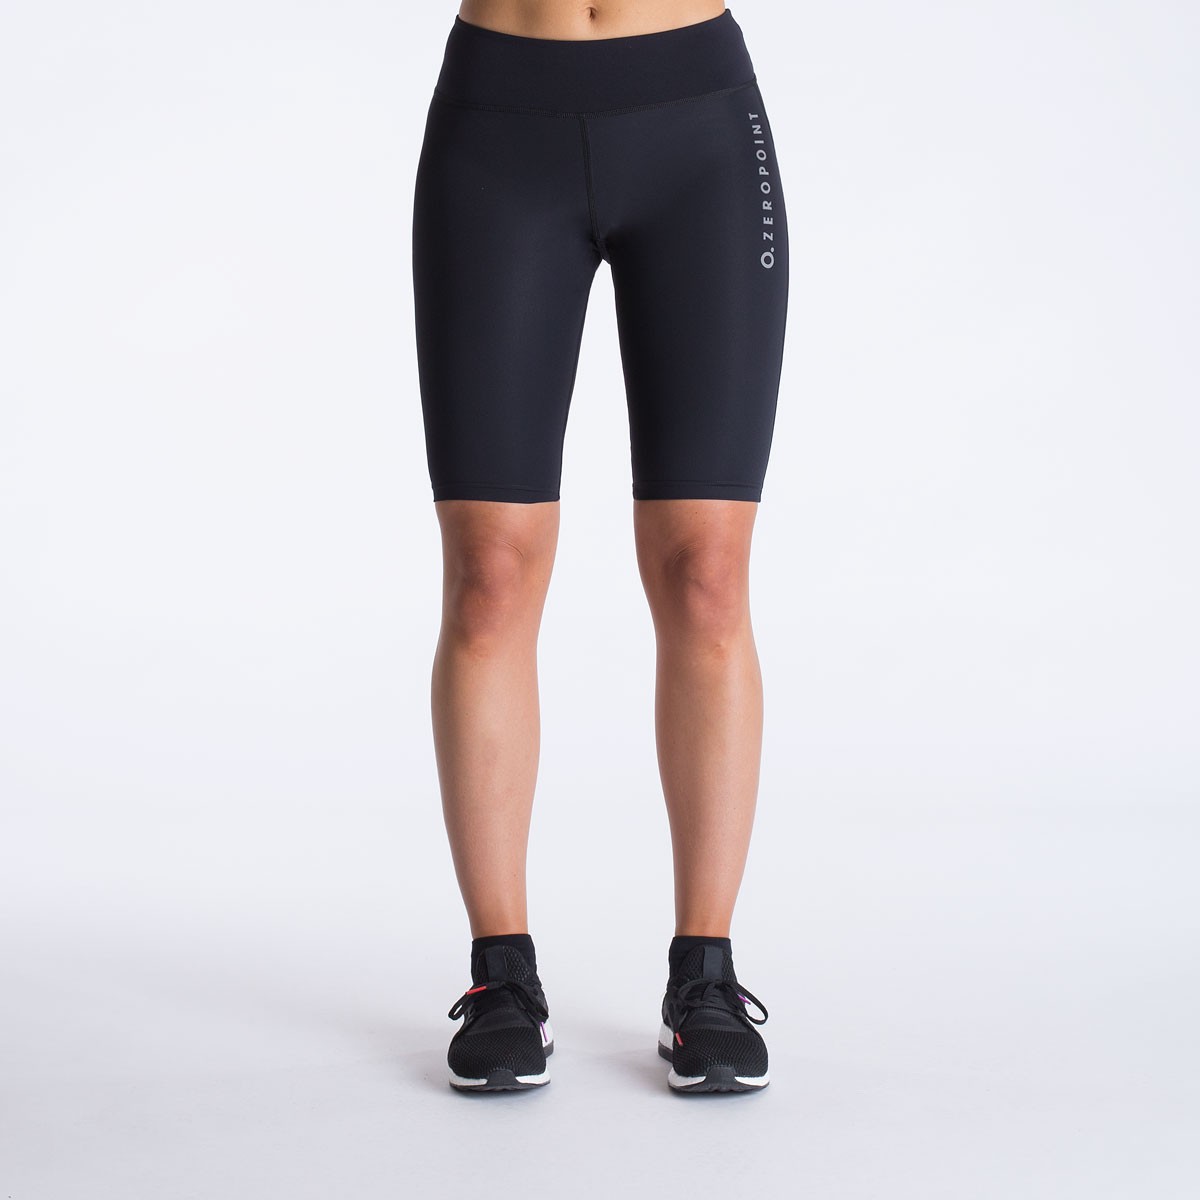 ZeroPoint Power Compression Shorts - Womens - Harris Active Sports B2B  Trade Store